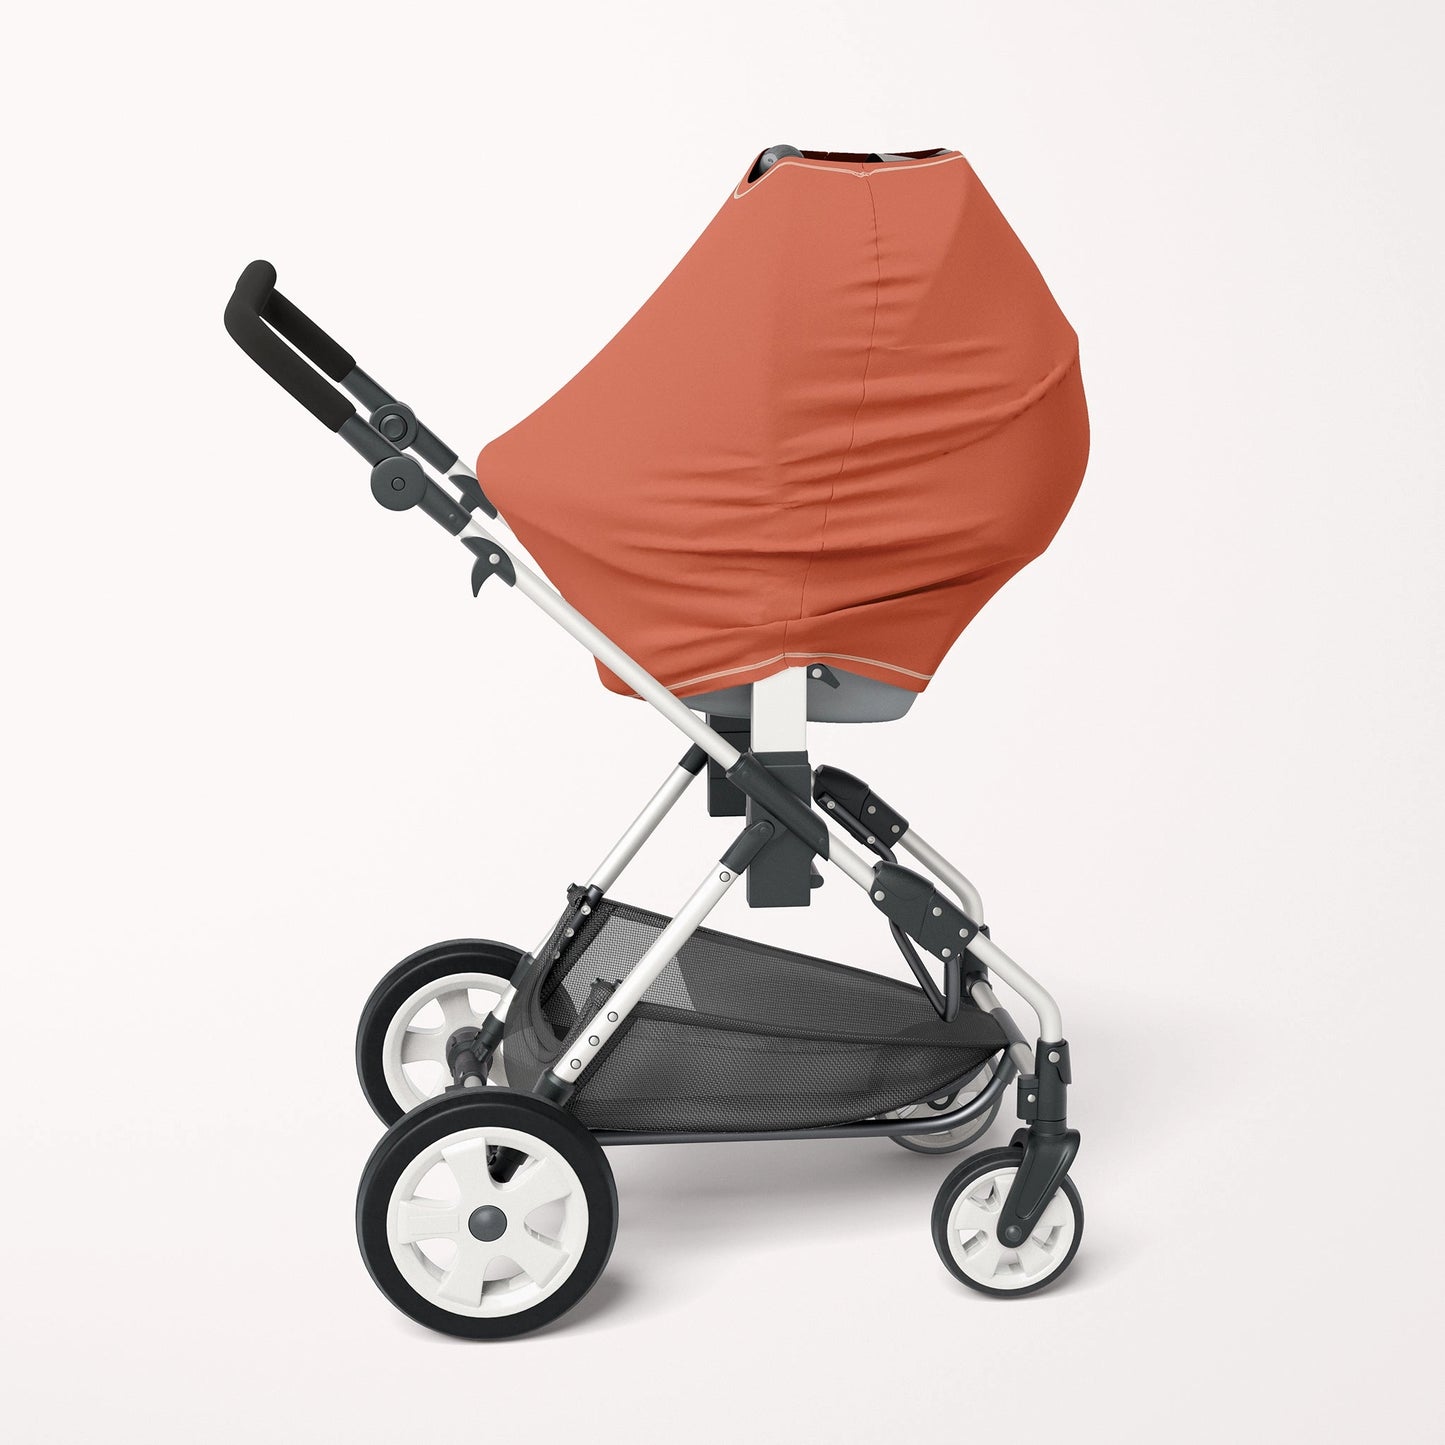 4-IN-1 Carseat Canopy